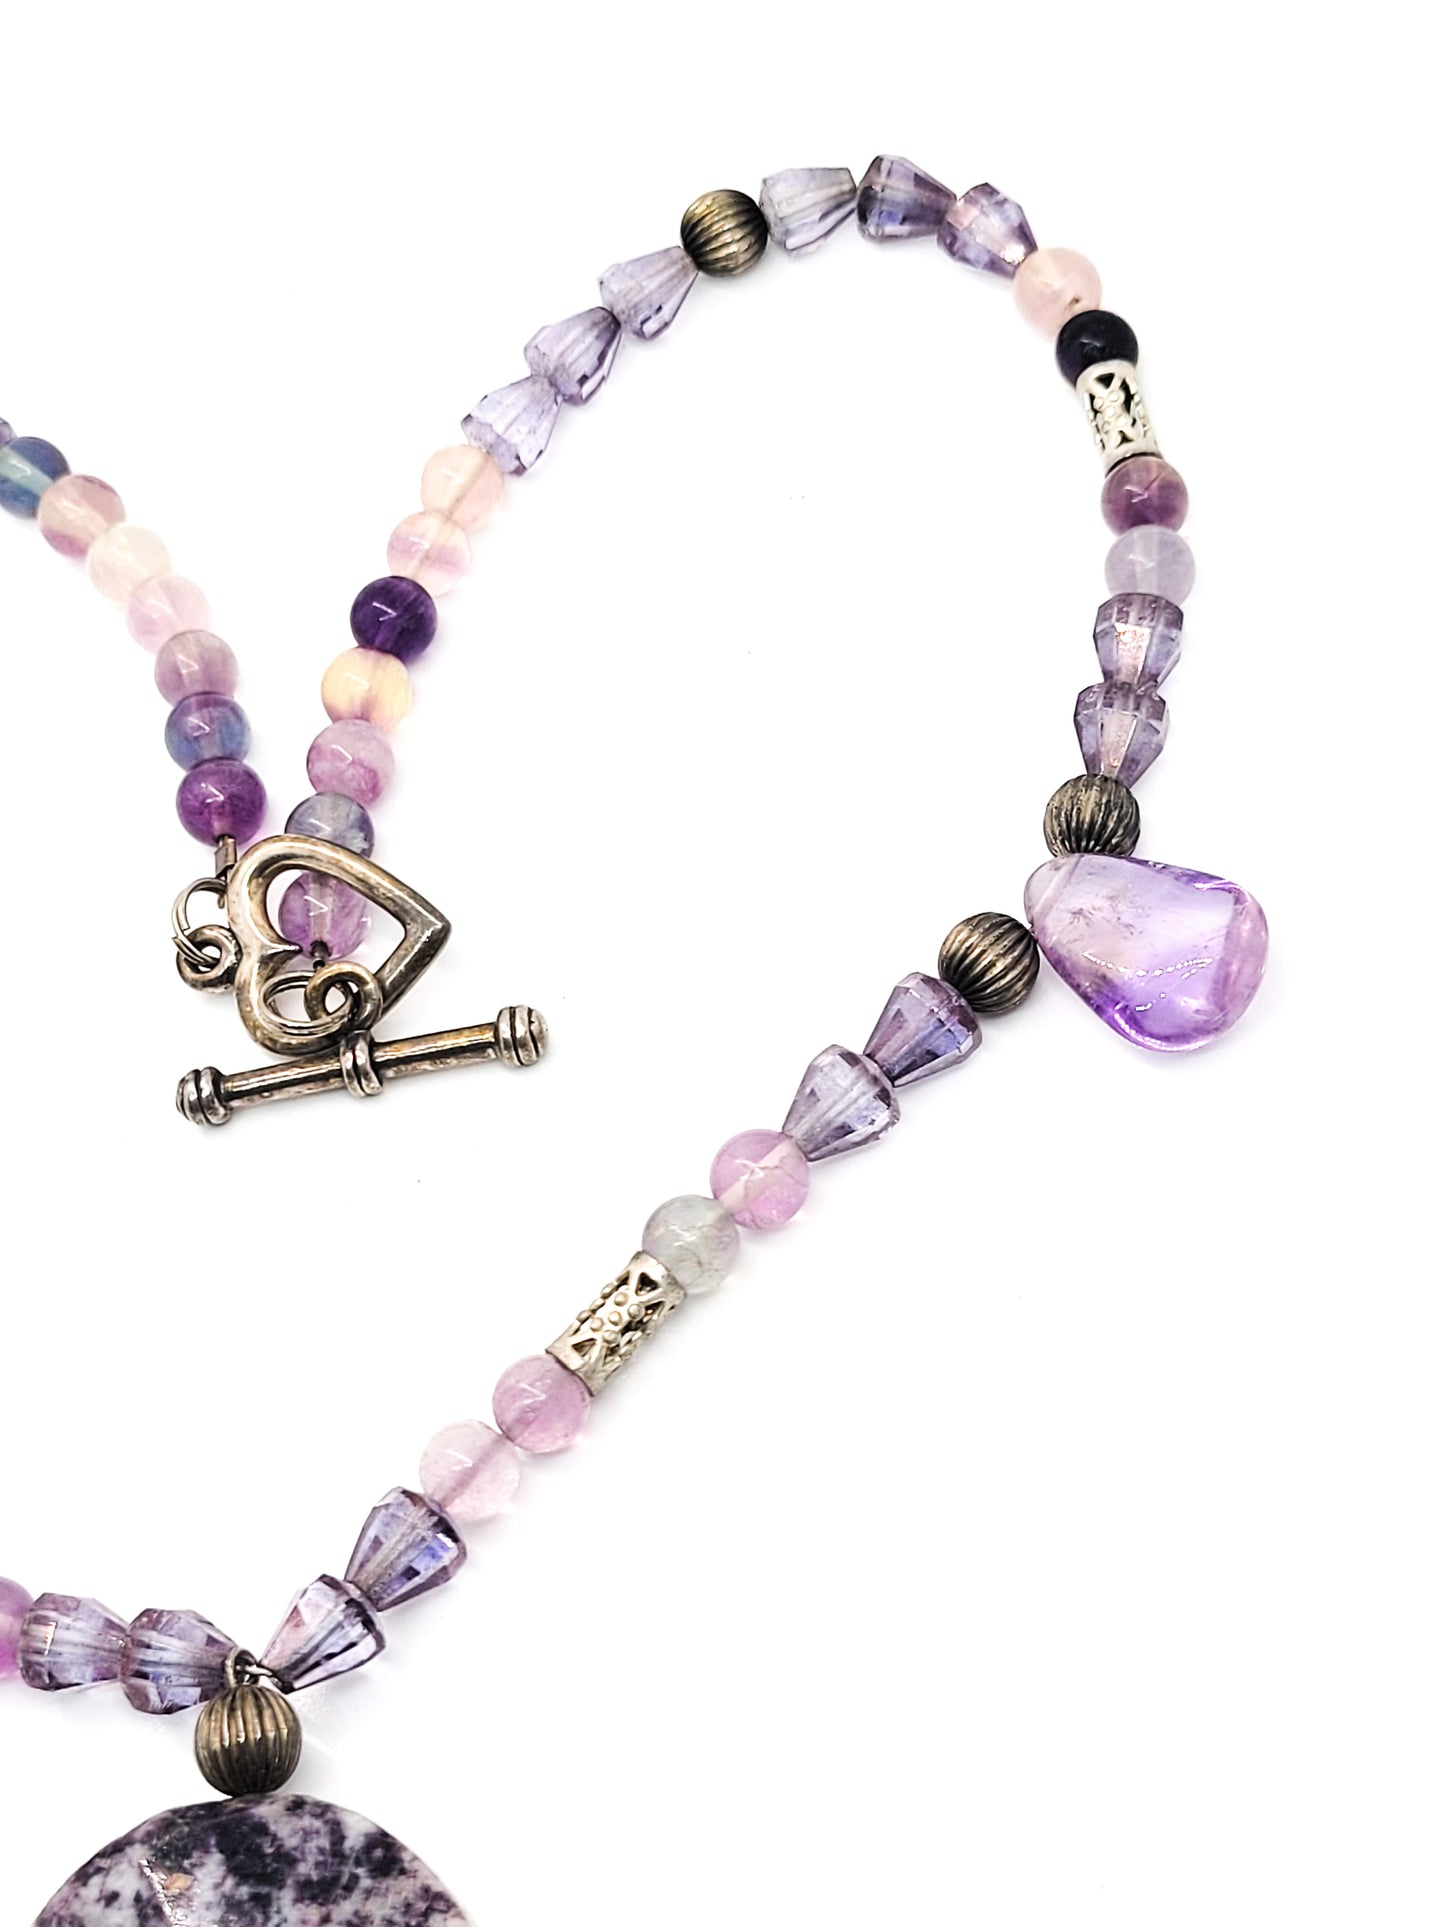 Lepidolite gemstone artisan necklace with flourite and amethyst necklace